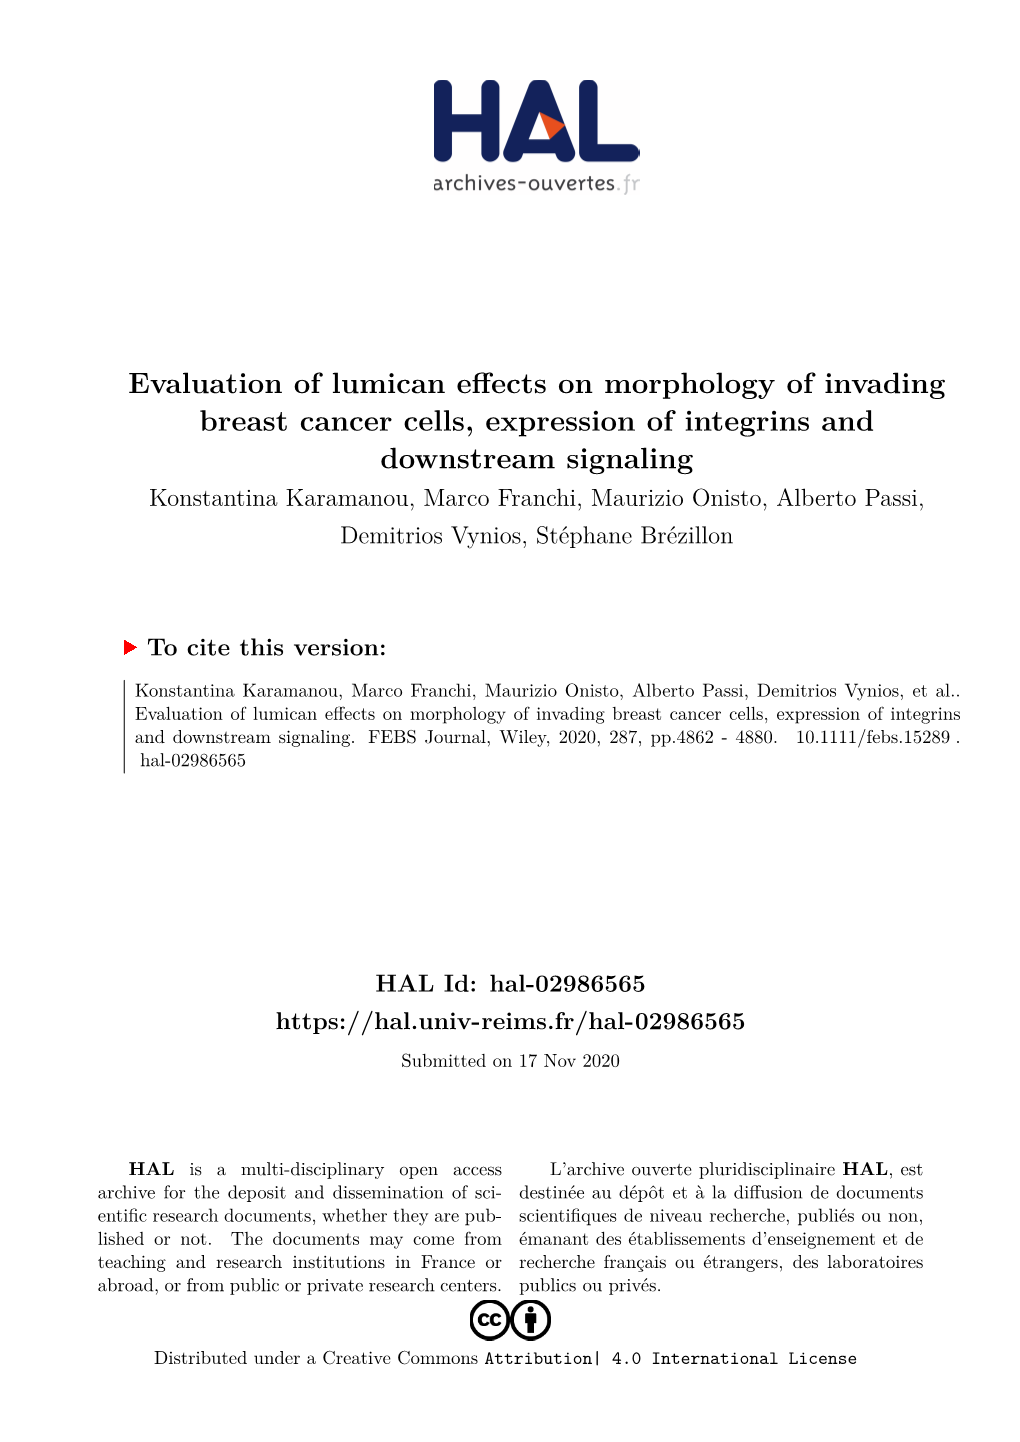 Evaluation of Lumican Effects on Morphology of Invading Breast